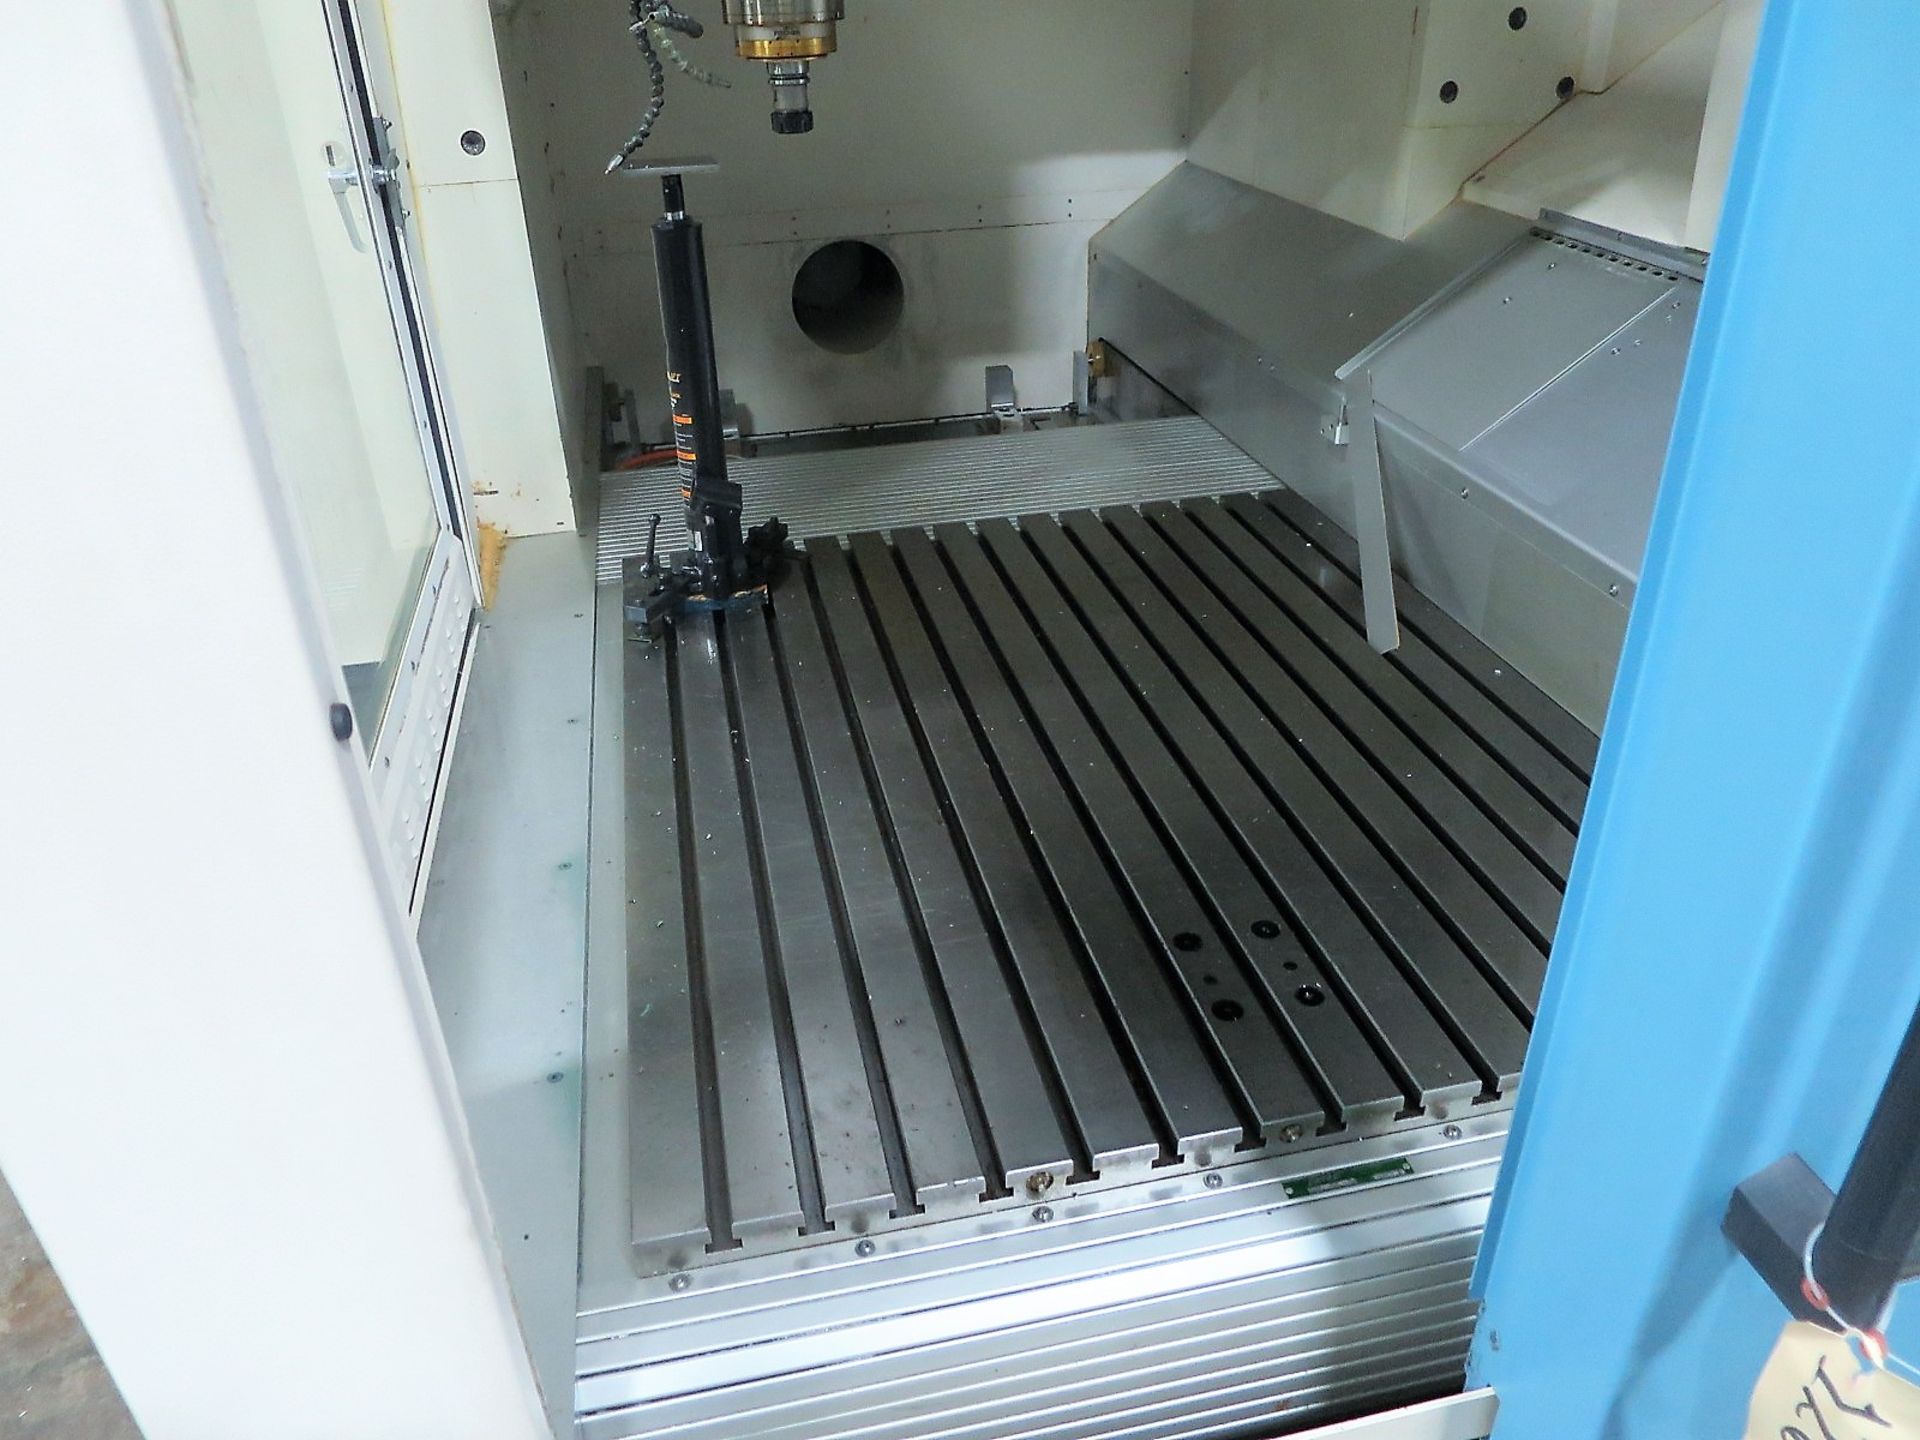 RODERS RFM 1000 HIGH SPEED CNC 3-AXIS VERTICAL MACHINING CENTER, S/N 10722-65, NEW 2004 - Image 6 of 16